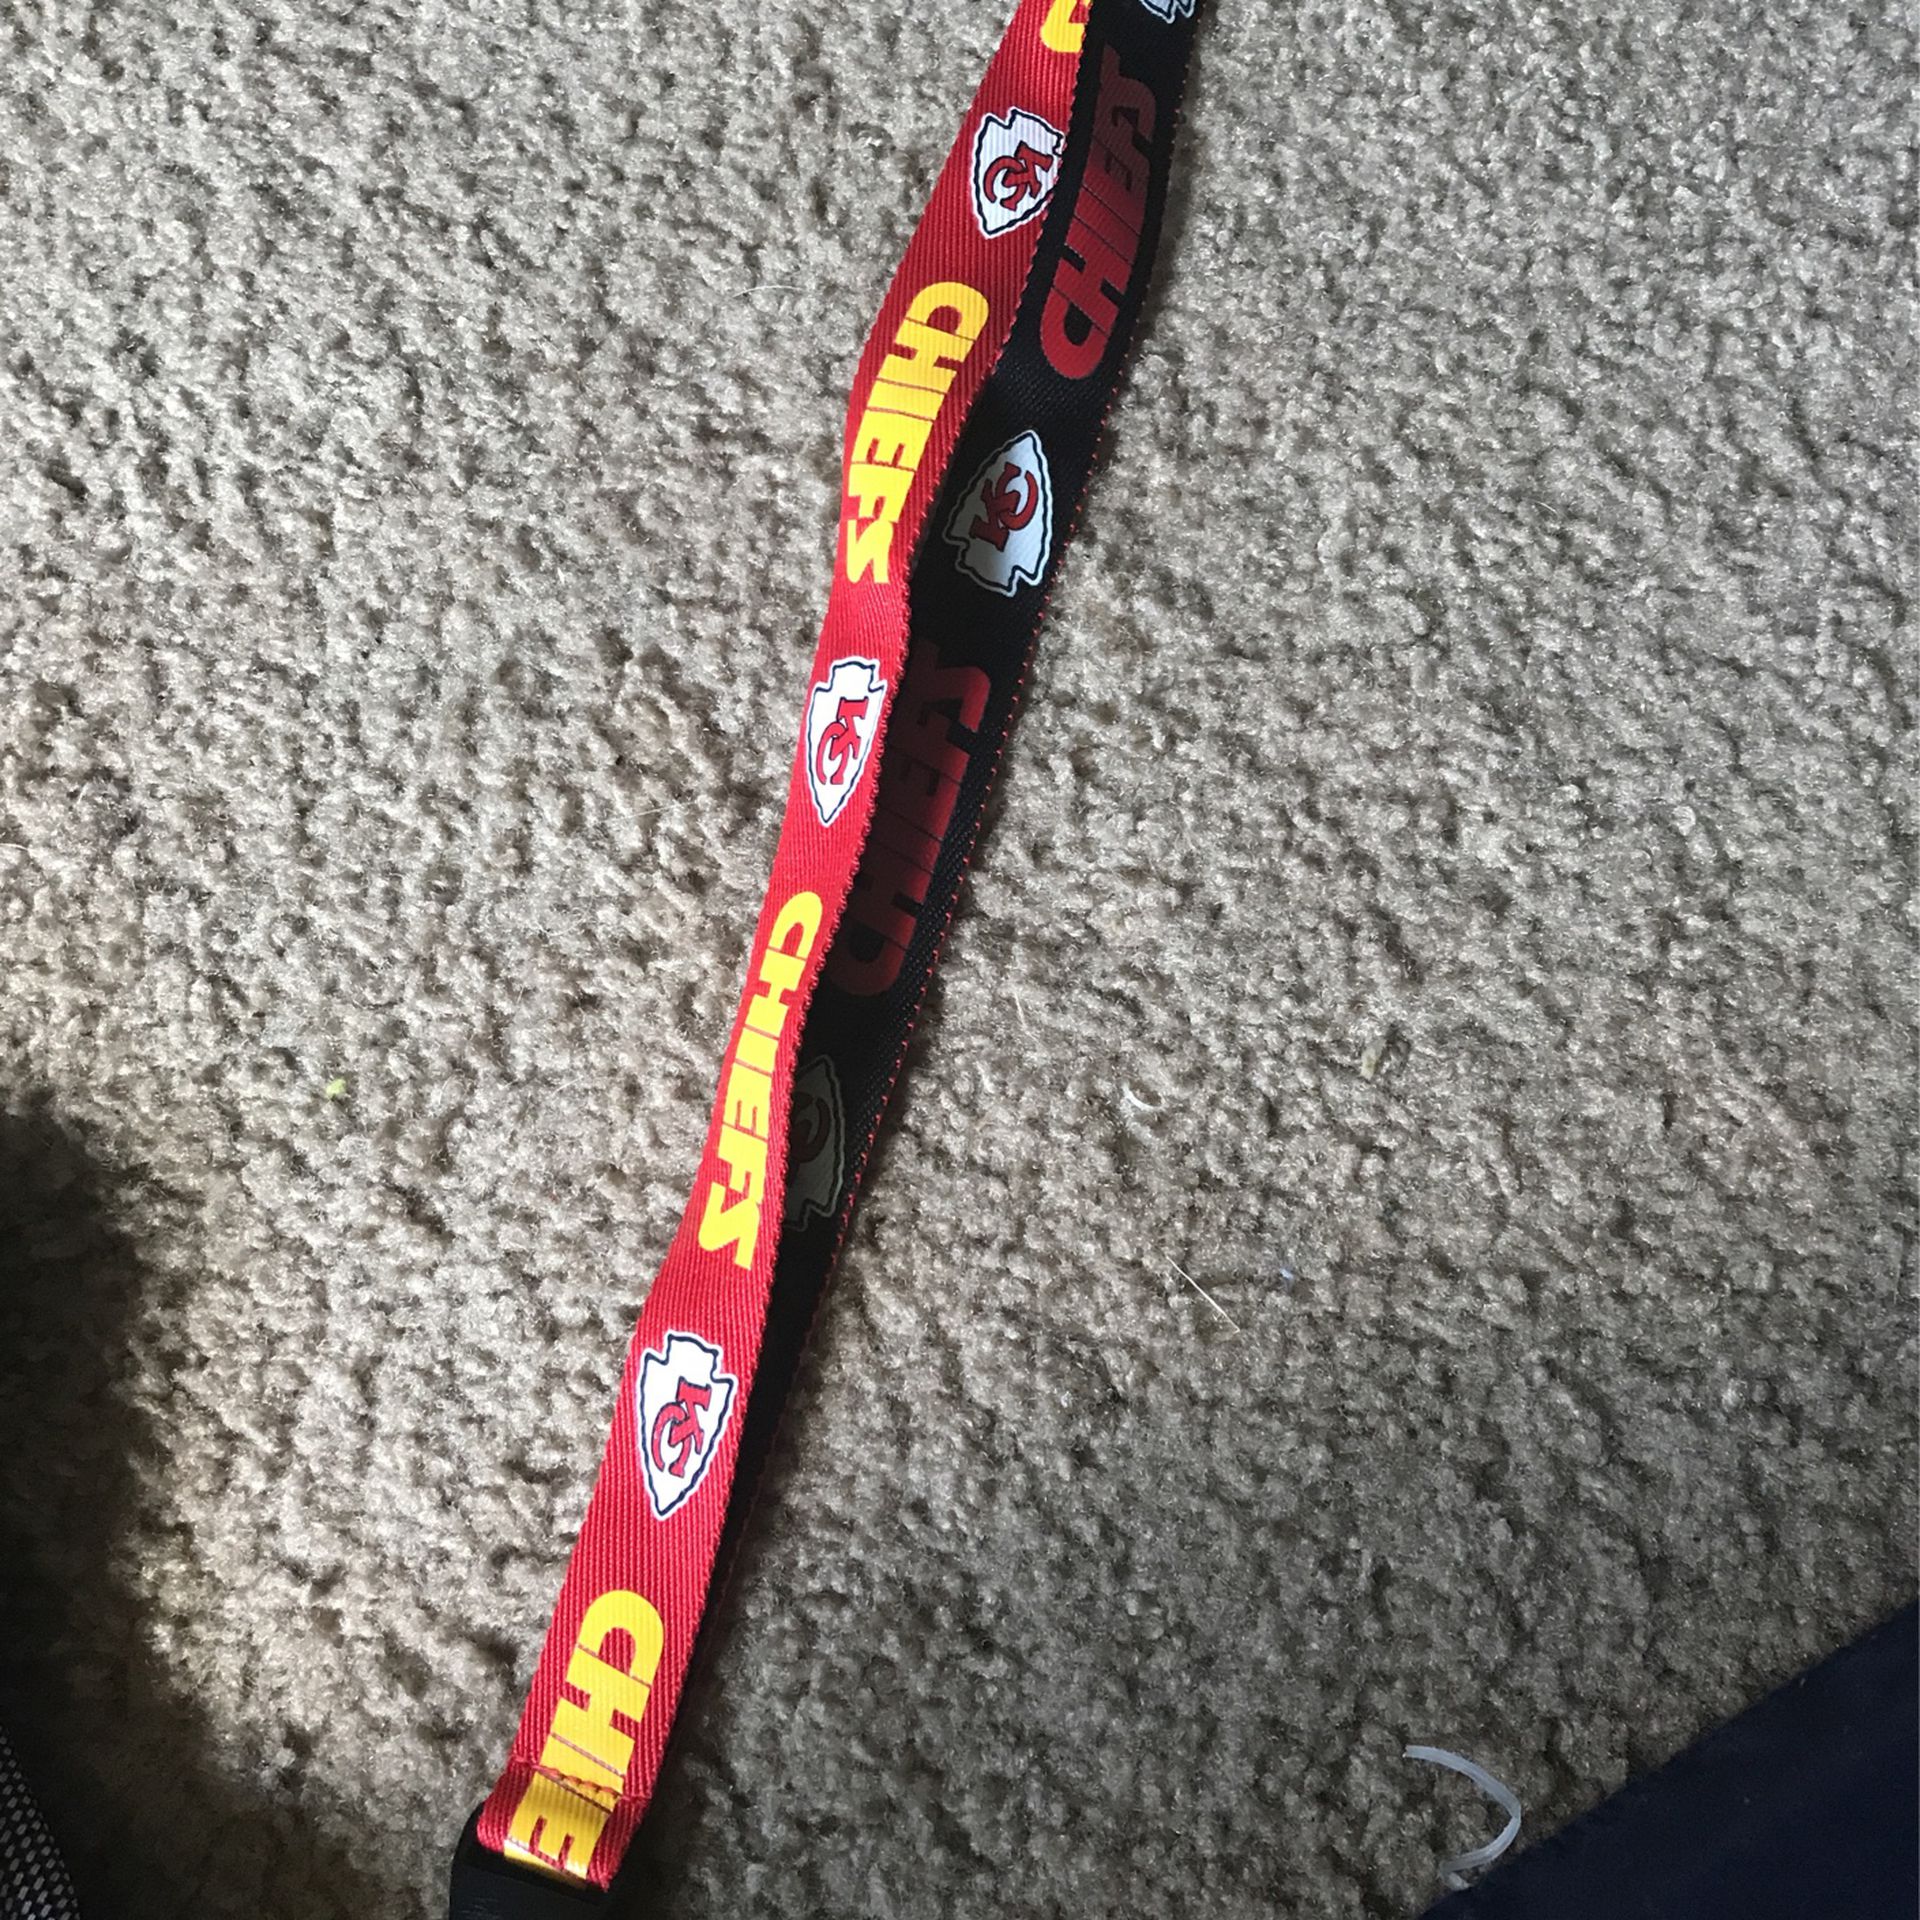 chiefs Hat, Chiefs Beanie And Chiefs Lanyard for Sale in Vancouver, WA -  OfferUp